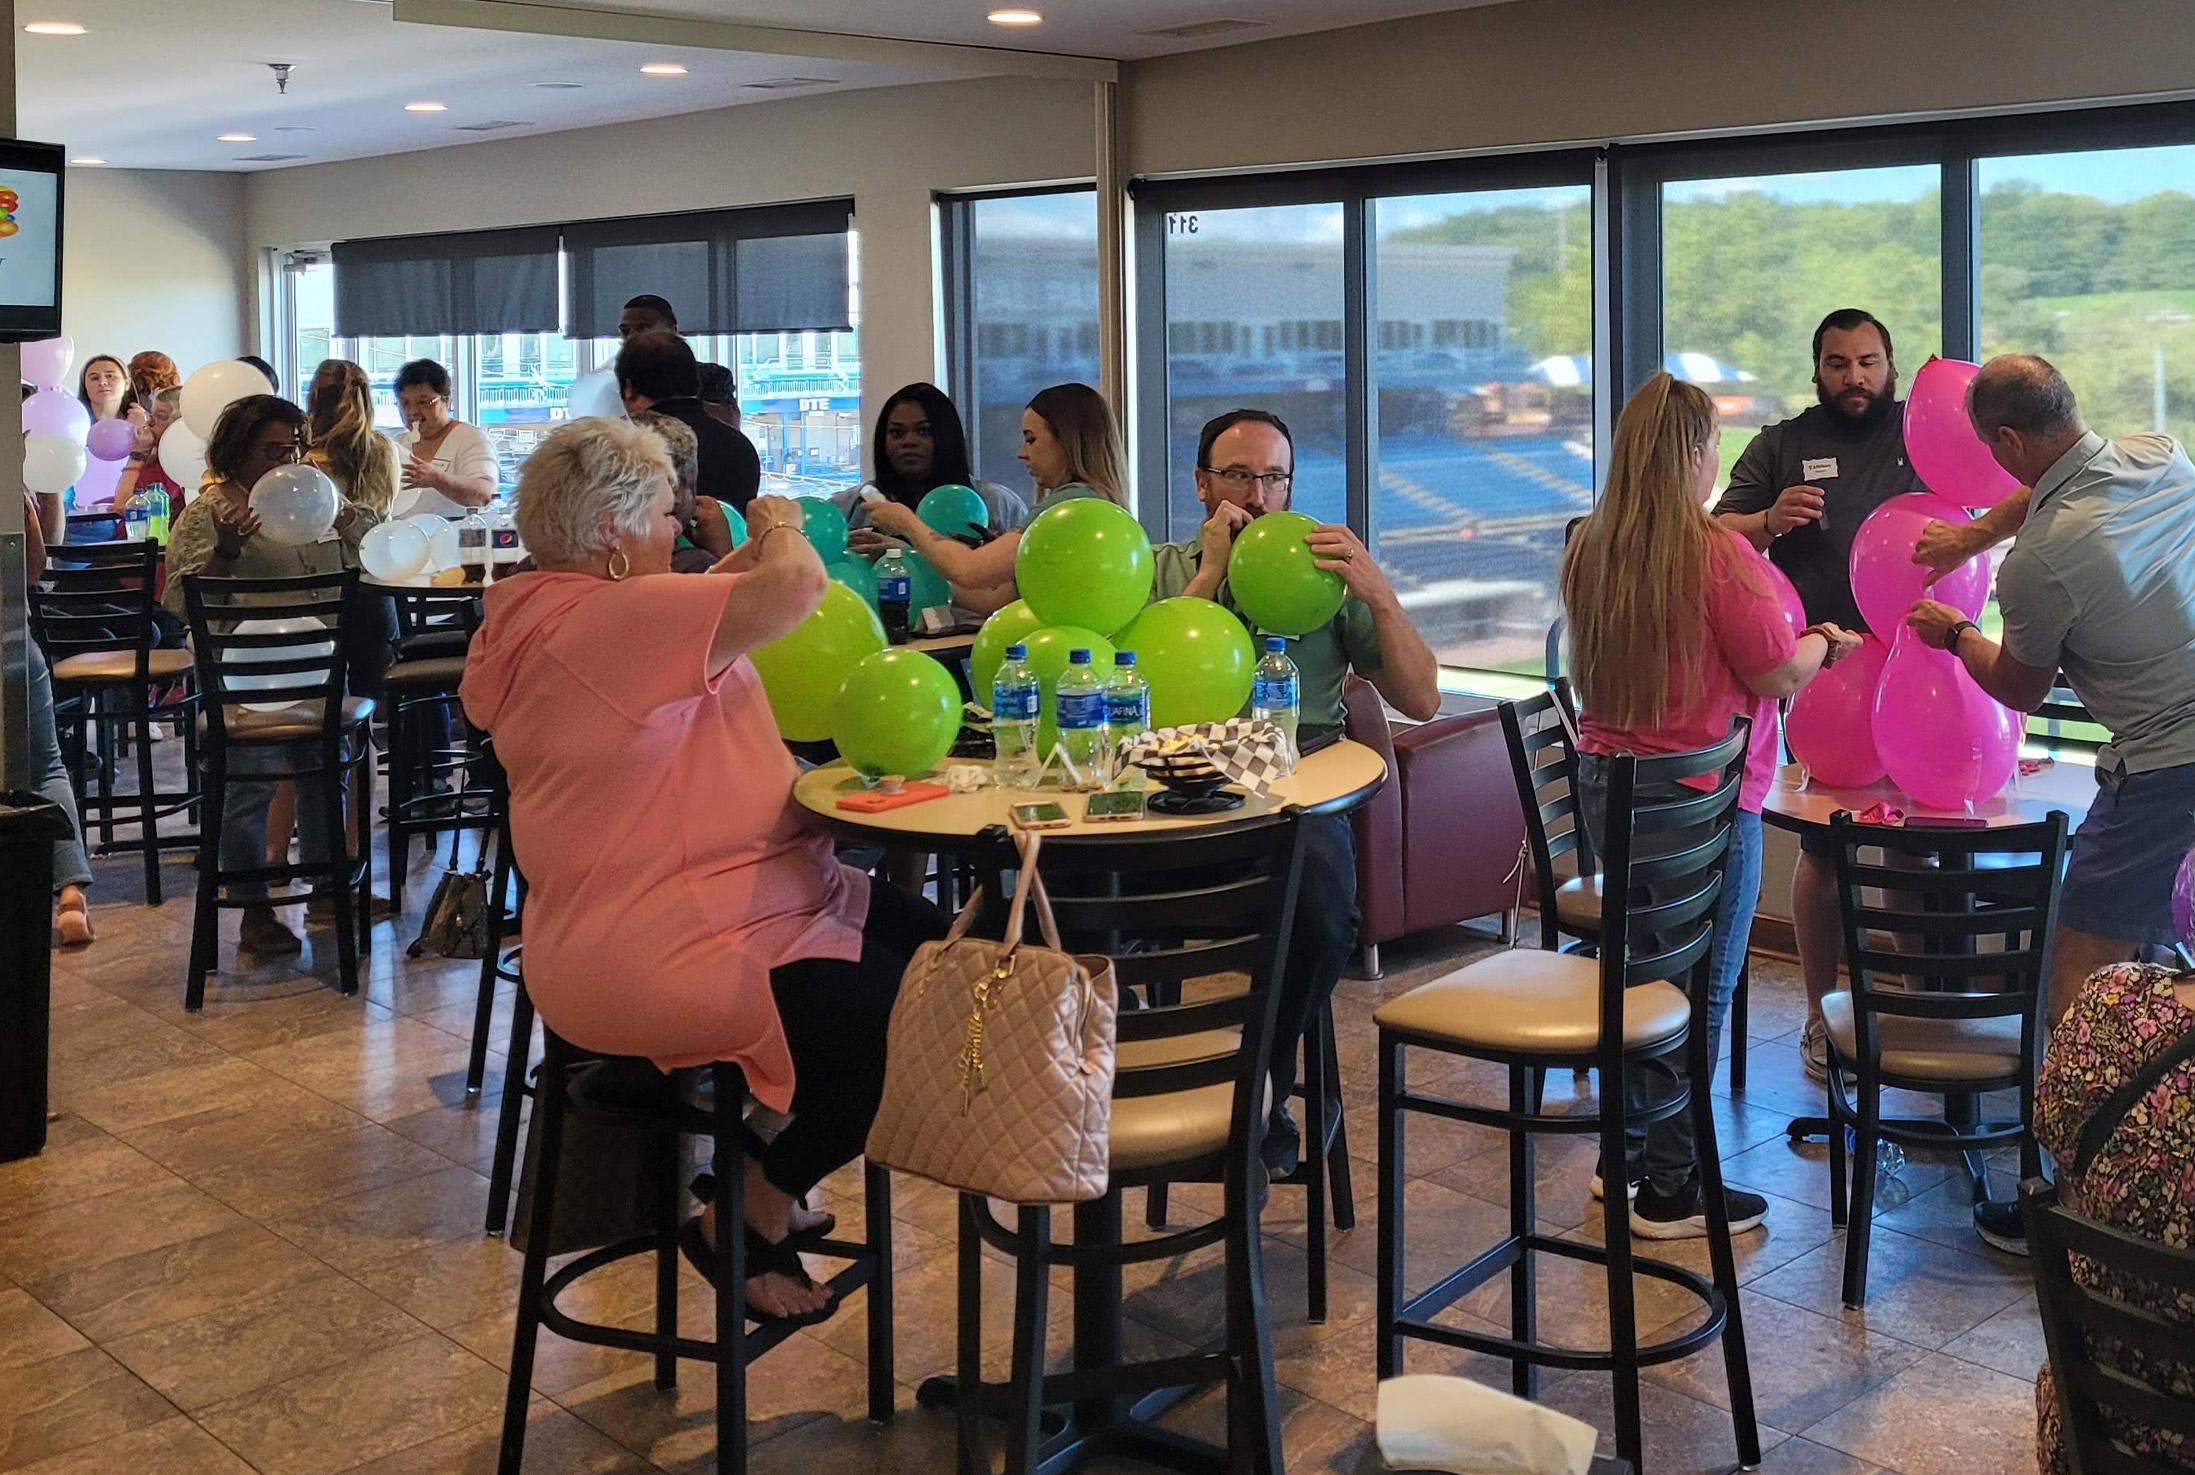 Comfortably enjoy a game with your friends and family at LMCU Ballpark Super Suite